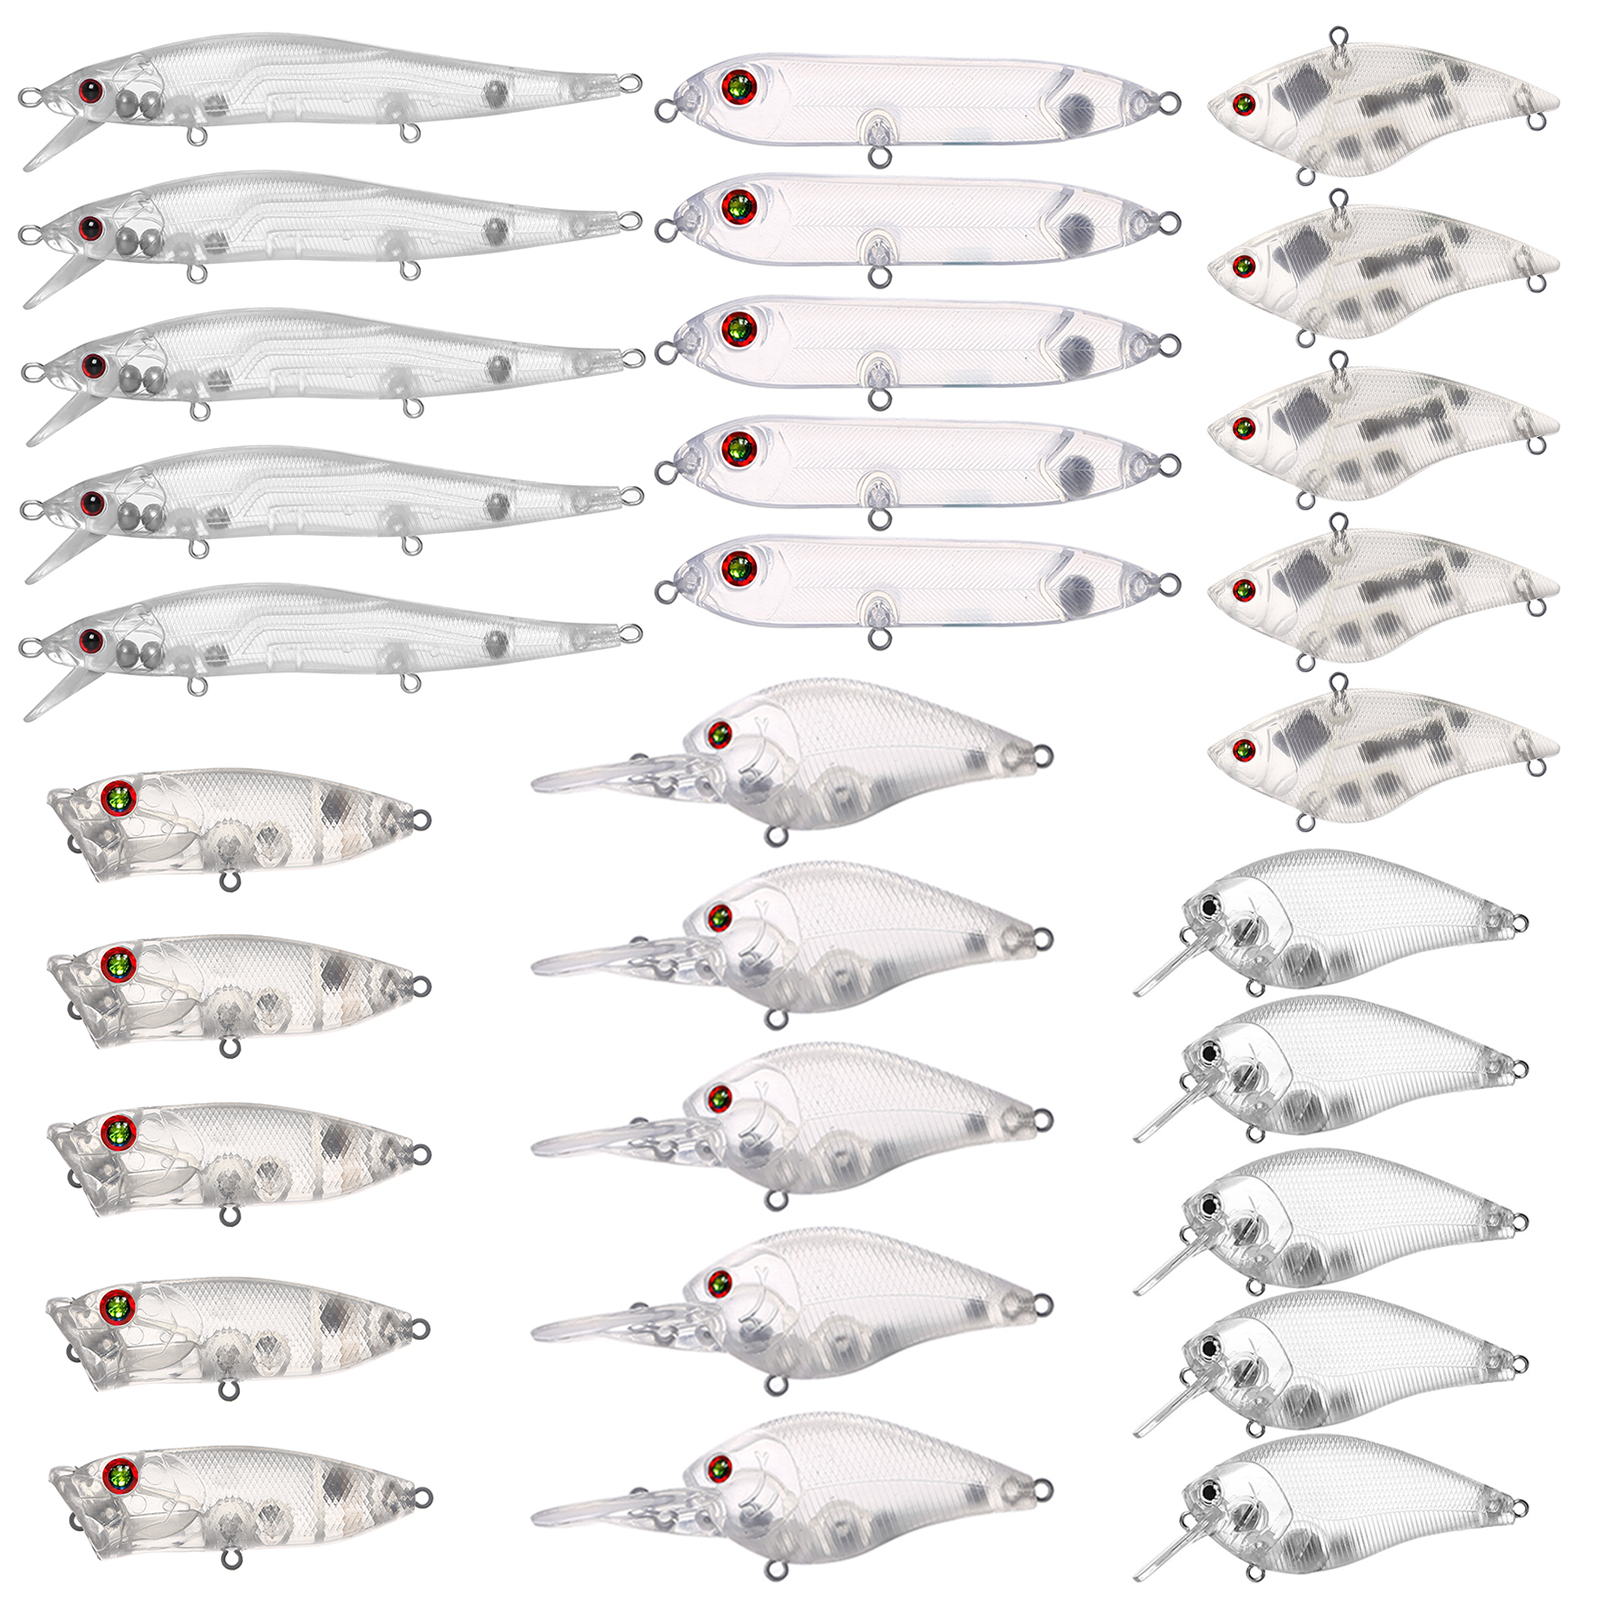 FREE FISHER 30pcs Mixed Unpainted Lures Fishing Blank Baits Set Crankbaits Minnows Pencil Blures VIB Clear Baits Naked Bait Embryo with 3D Eyes